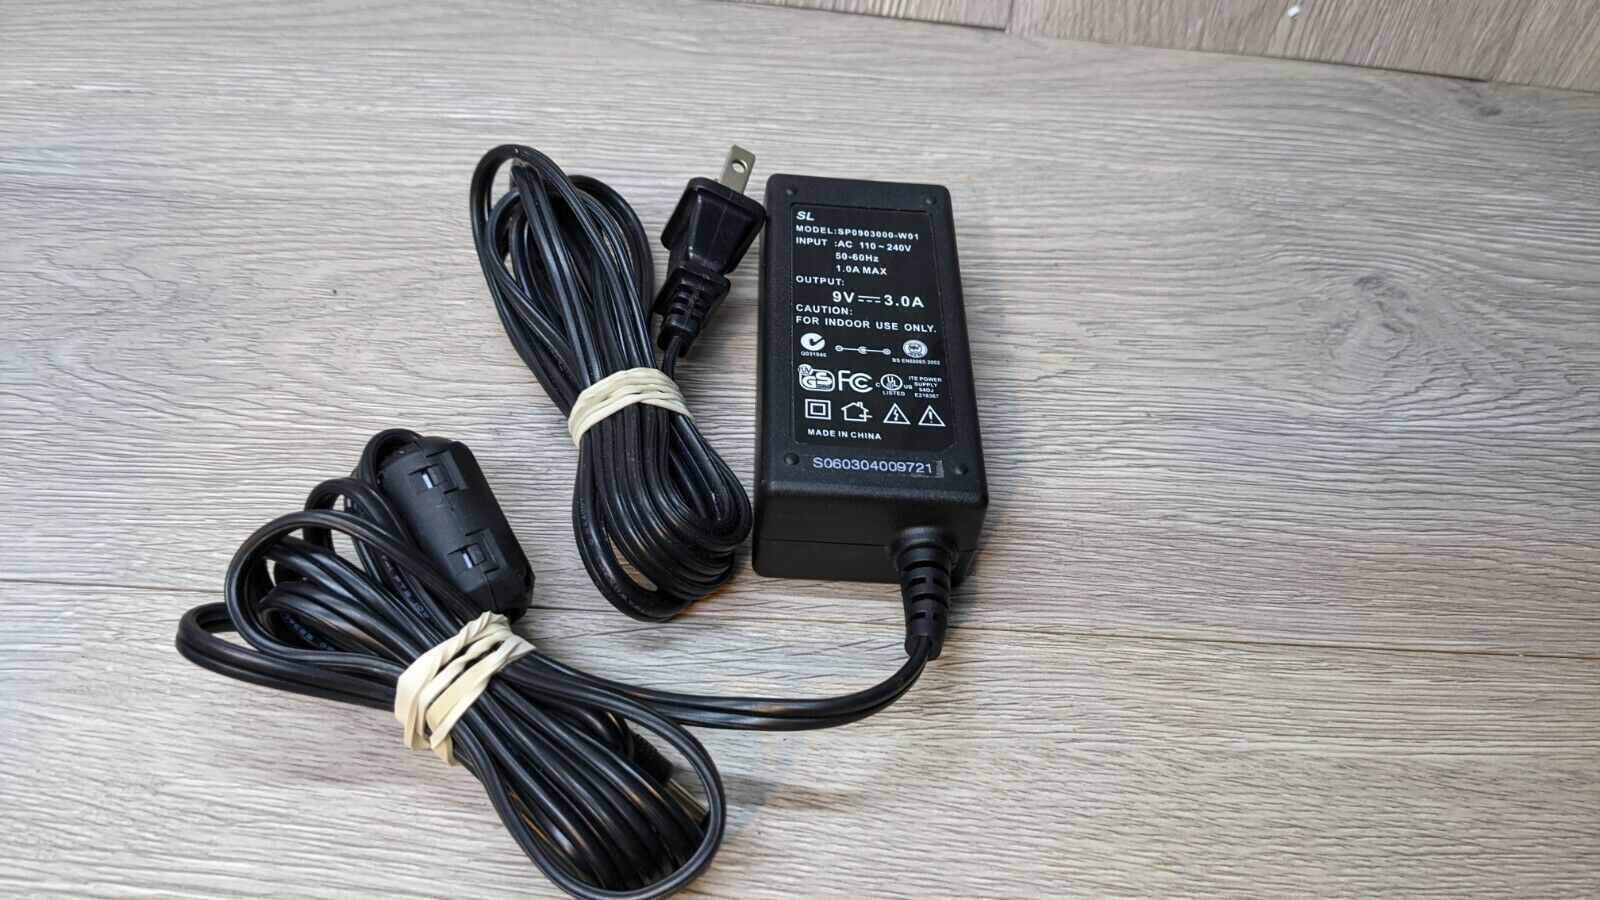 SL SP0903000-W01 AC Adapter Output 9V 2.2A Power Supply Transformer Charger Type: AC/AC Adapter Fe